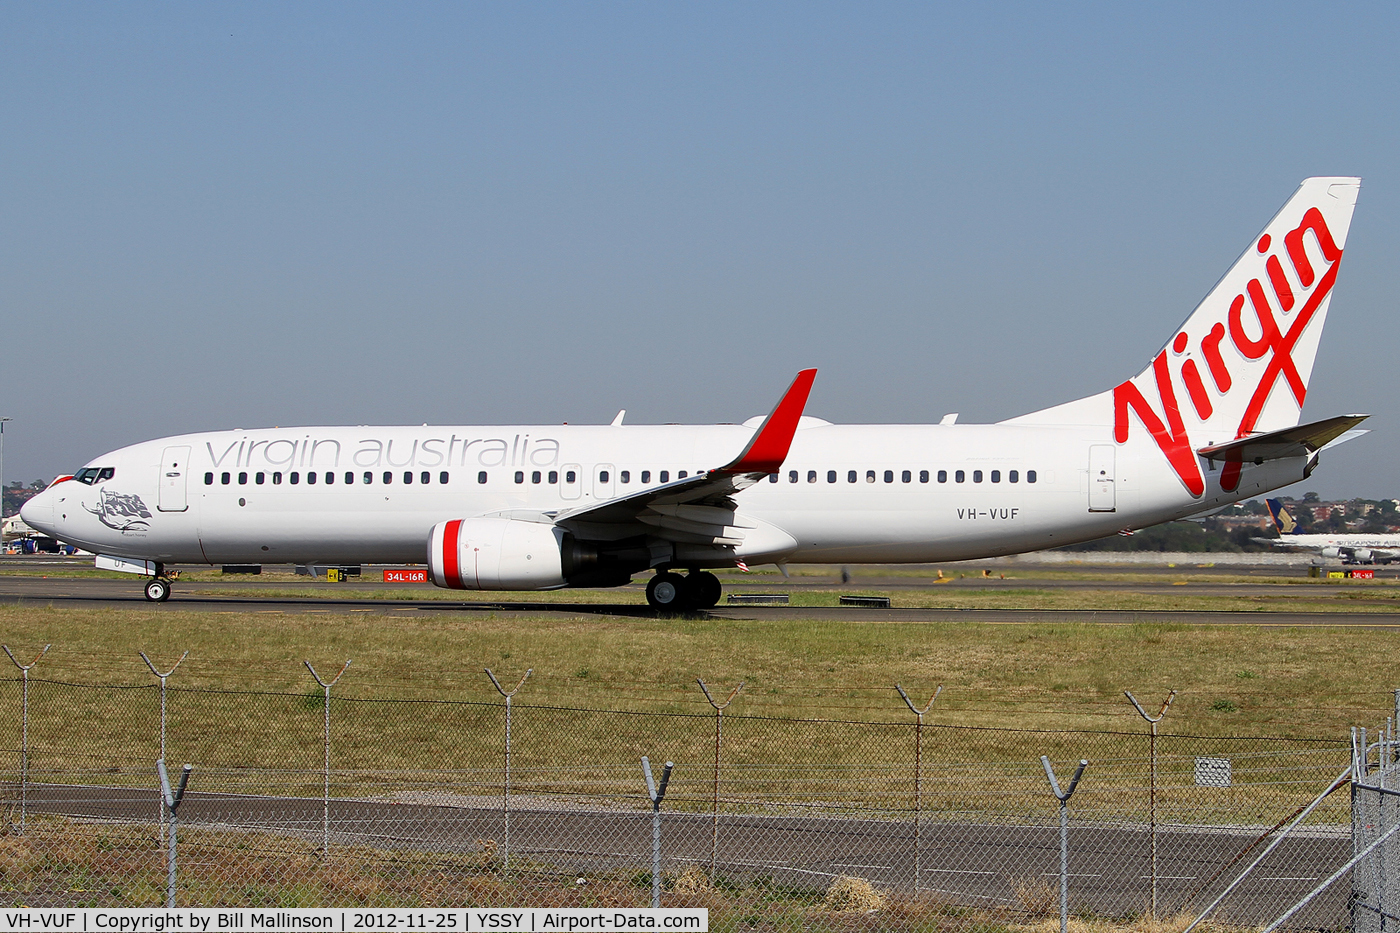 VH-VUF, 2005 Boeing 737-8FE C/N 34168, taxi to 34R